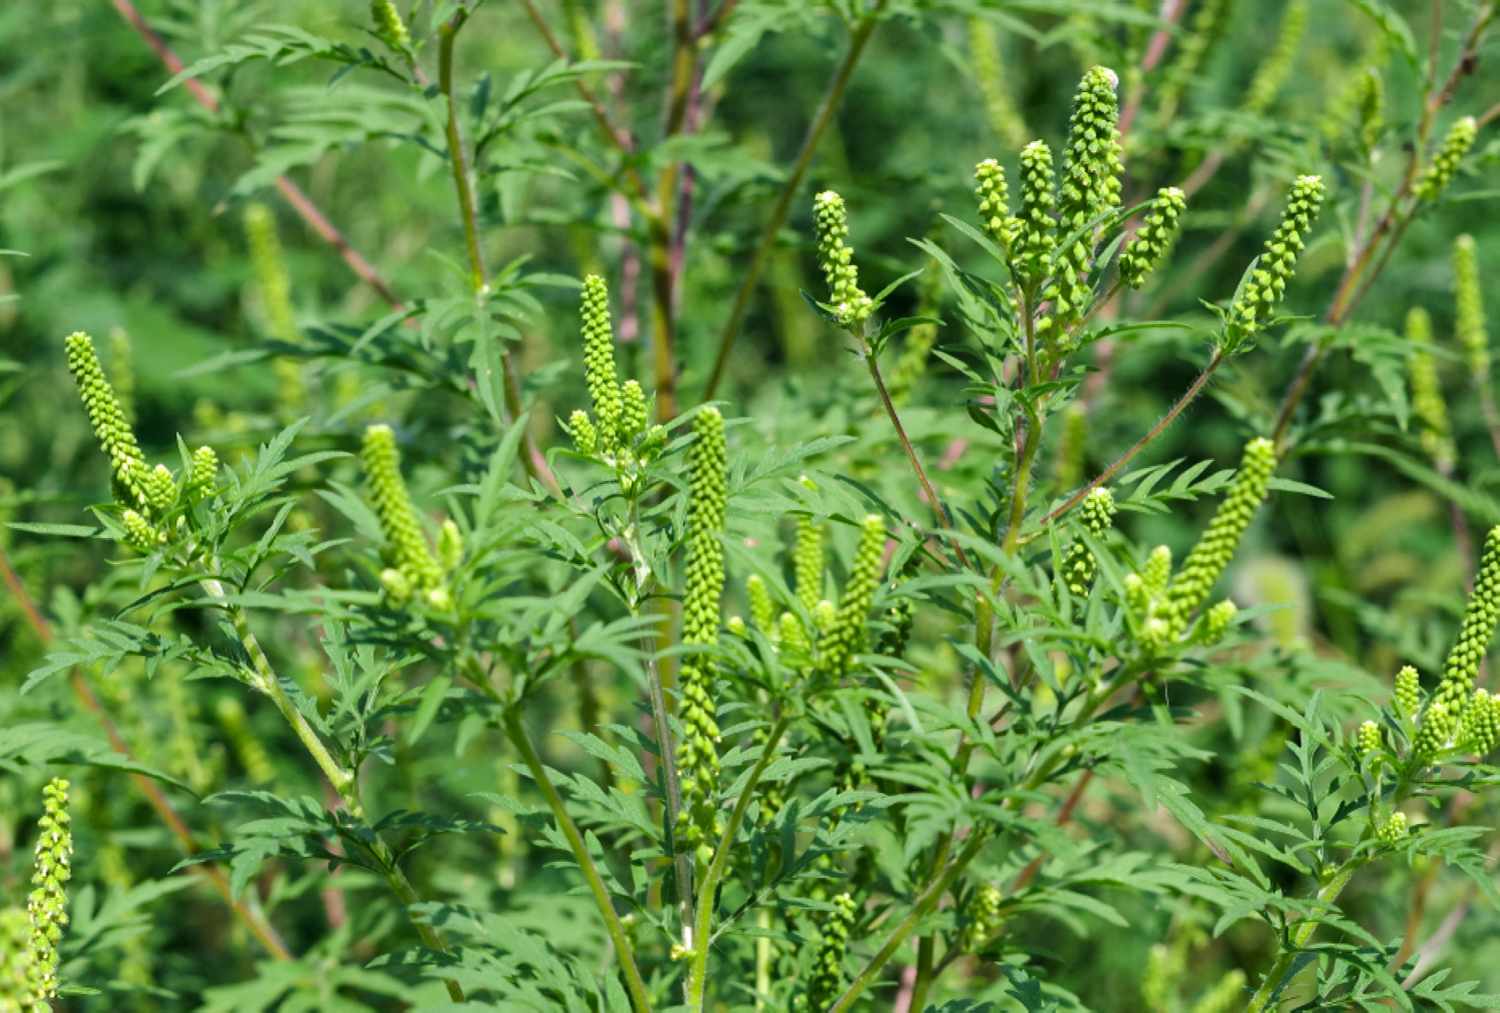 Young ragweed plants with budding green spikes, surrounded by other lush vegetation.